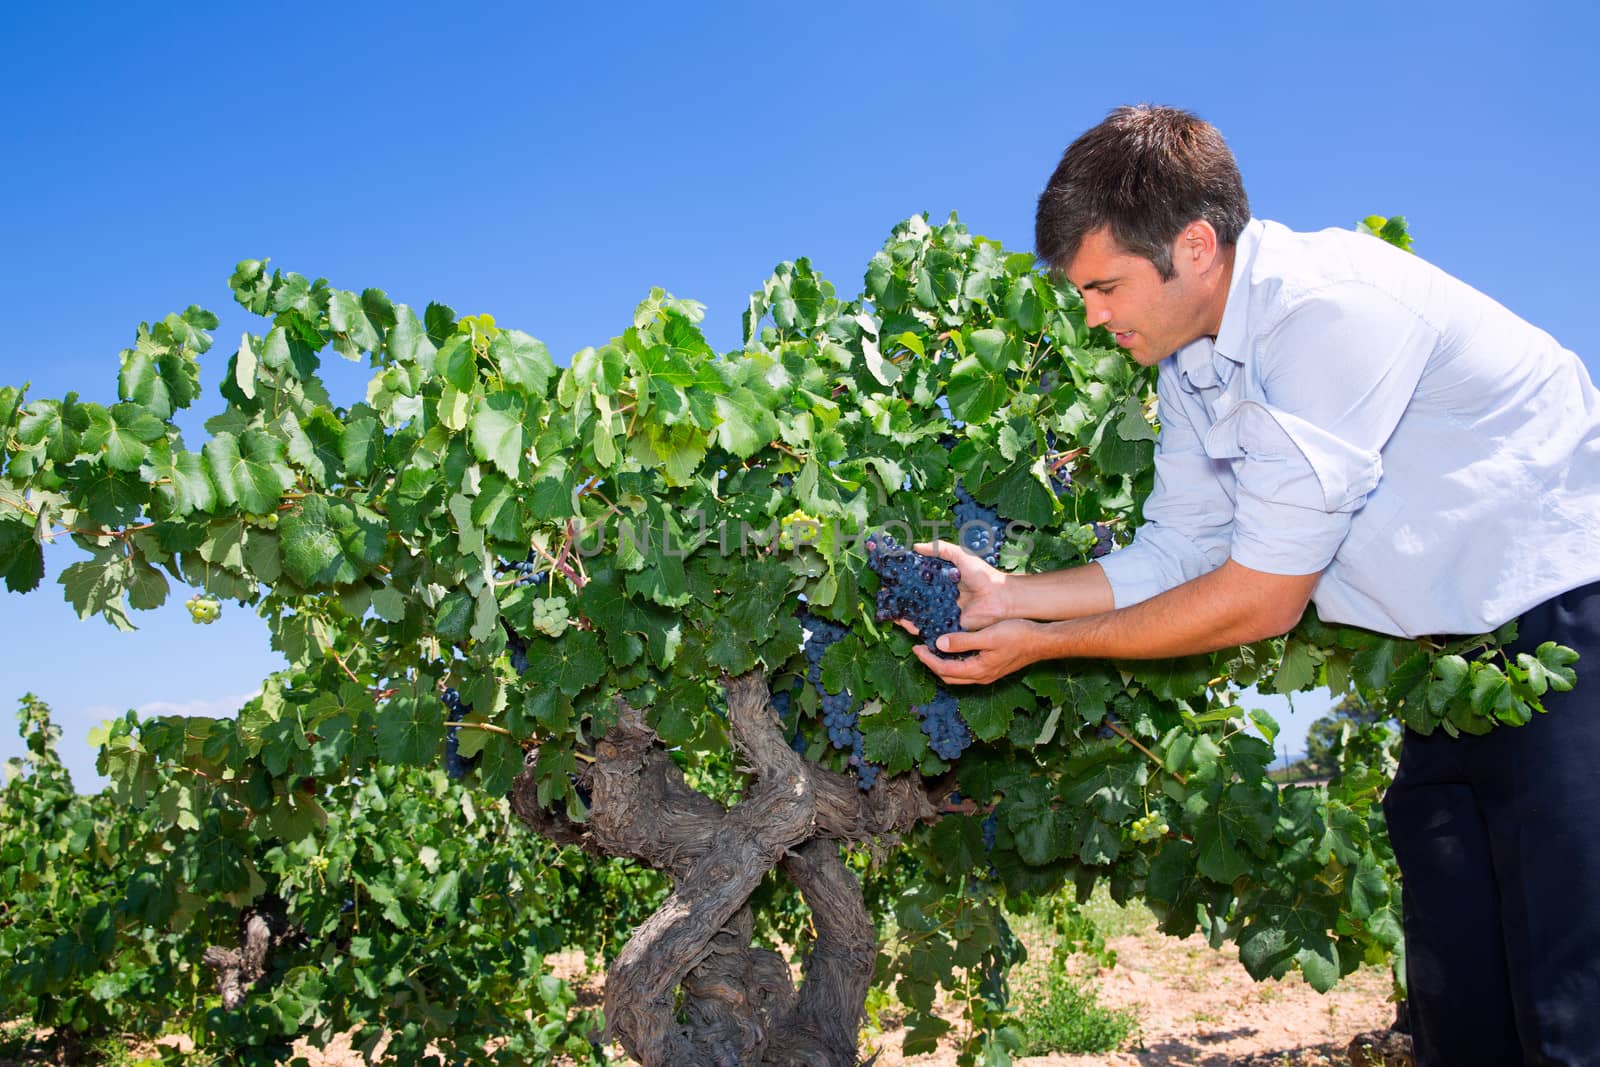 Winemaker oenologist checking bobal wine grapes ready for harvest in Mediterranean